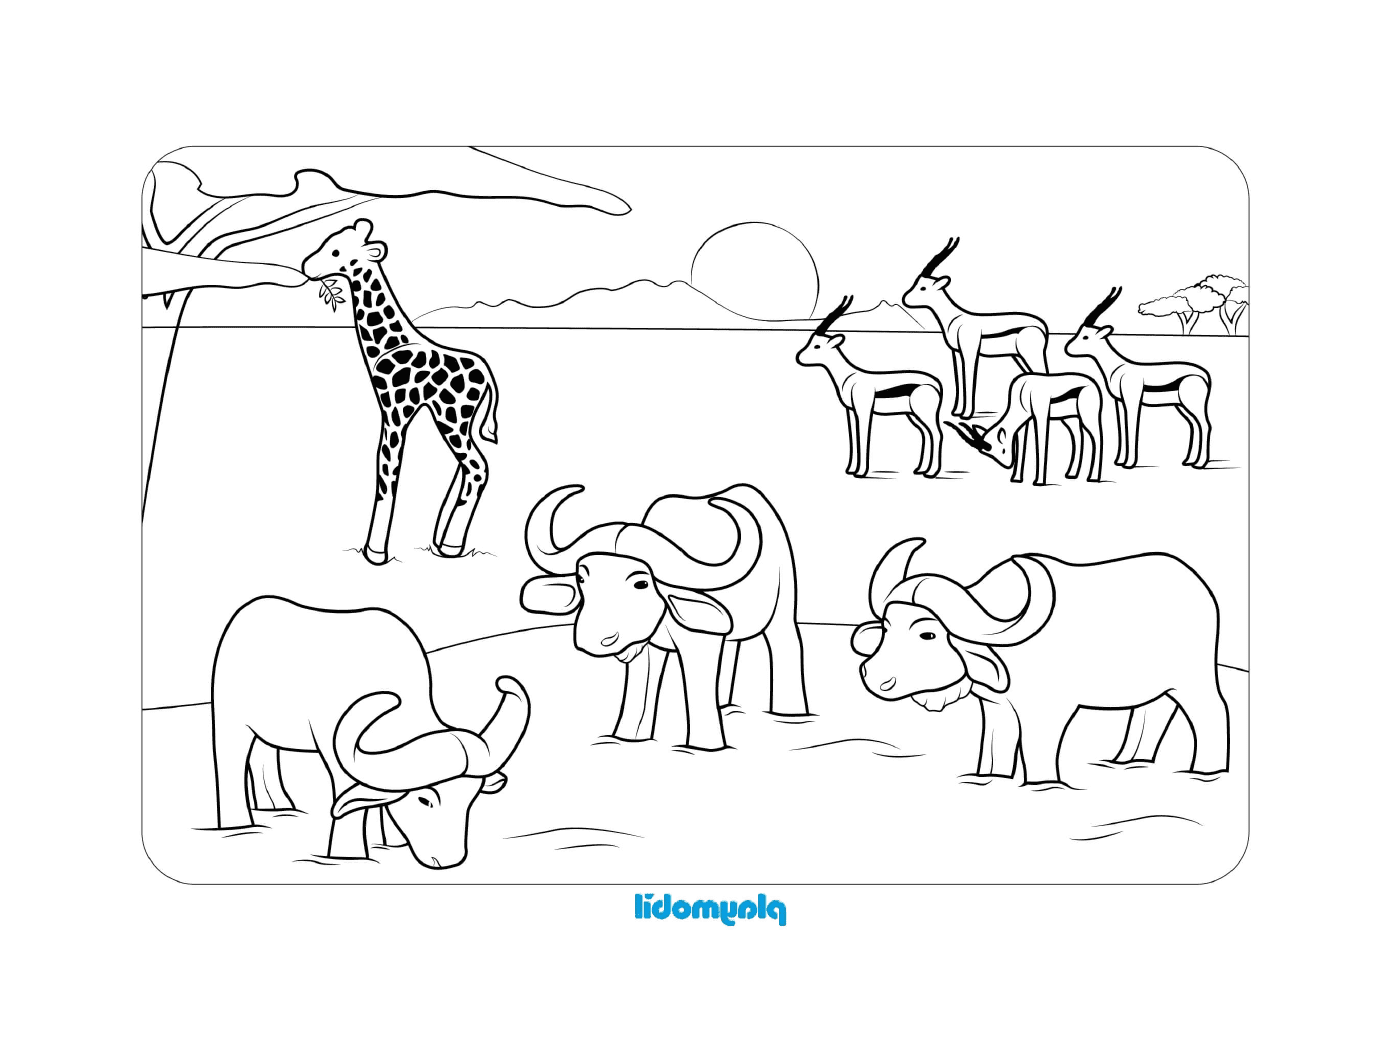  Various animals in this image 